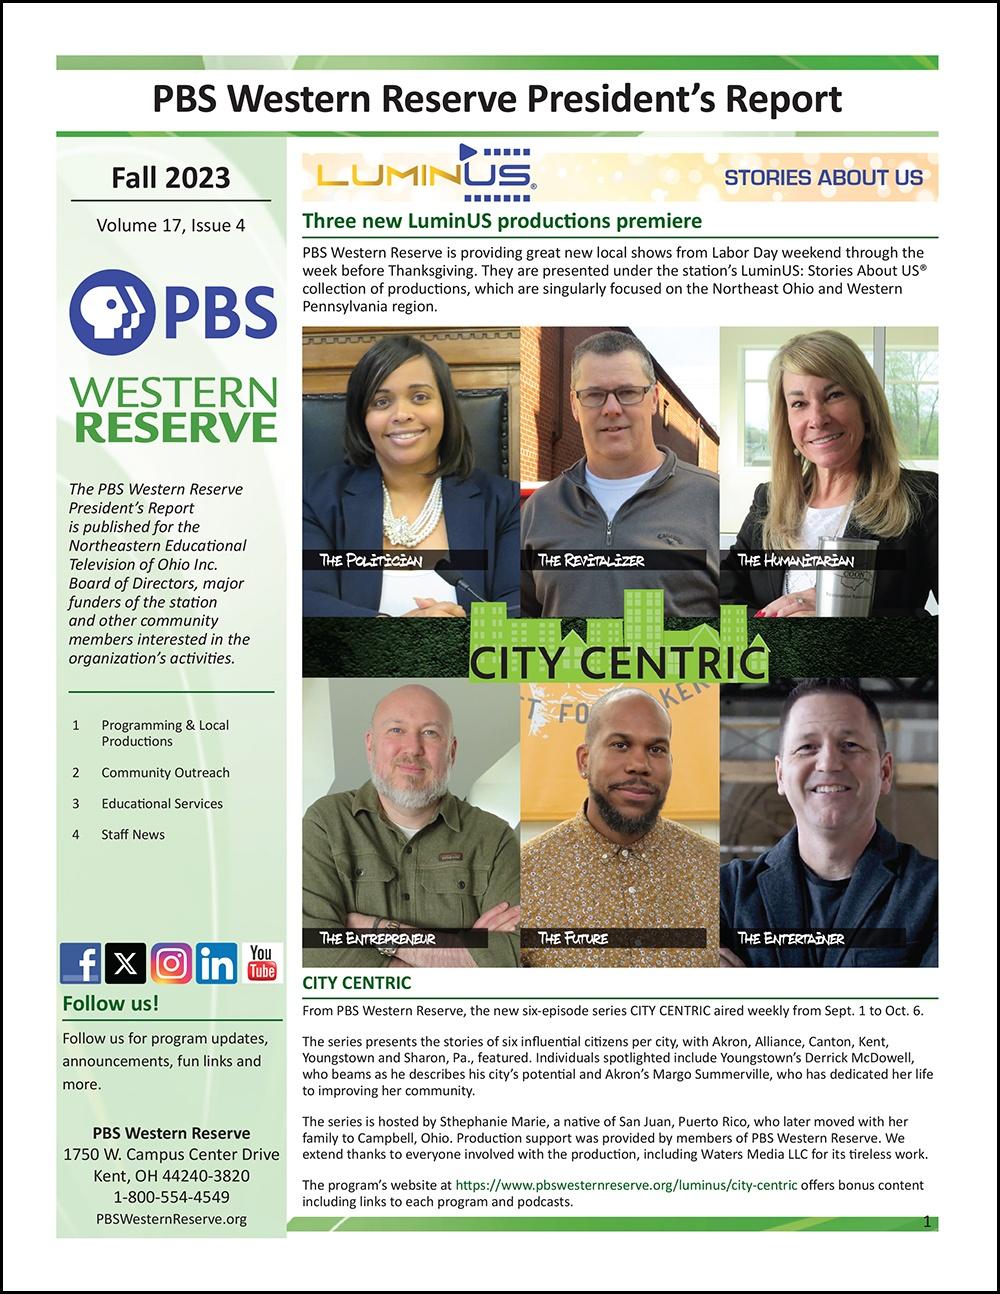 PBS Western Reserve President's Report - Fall 2023